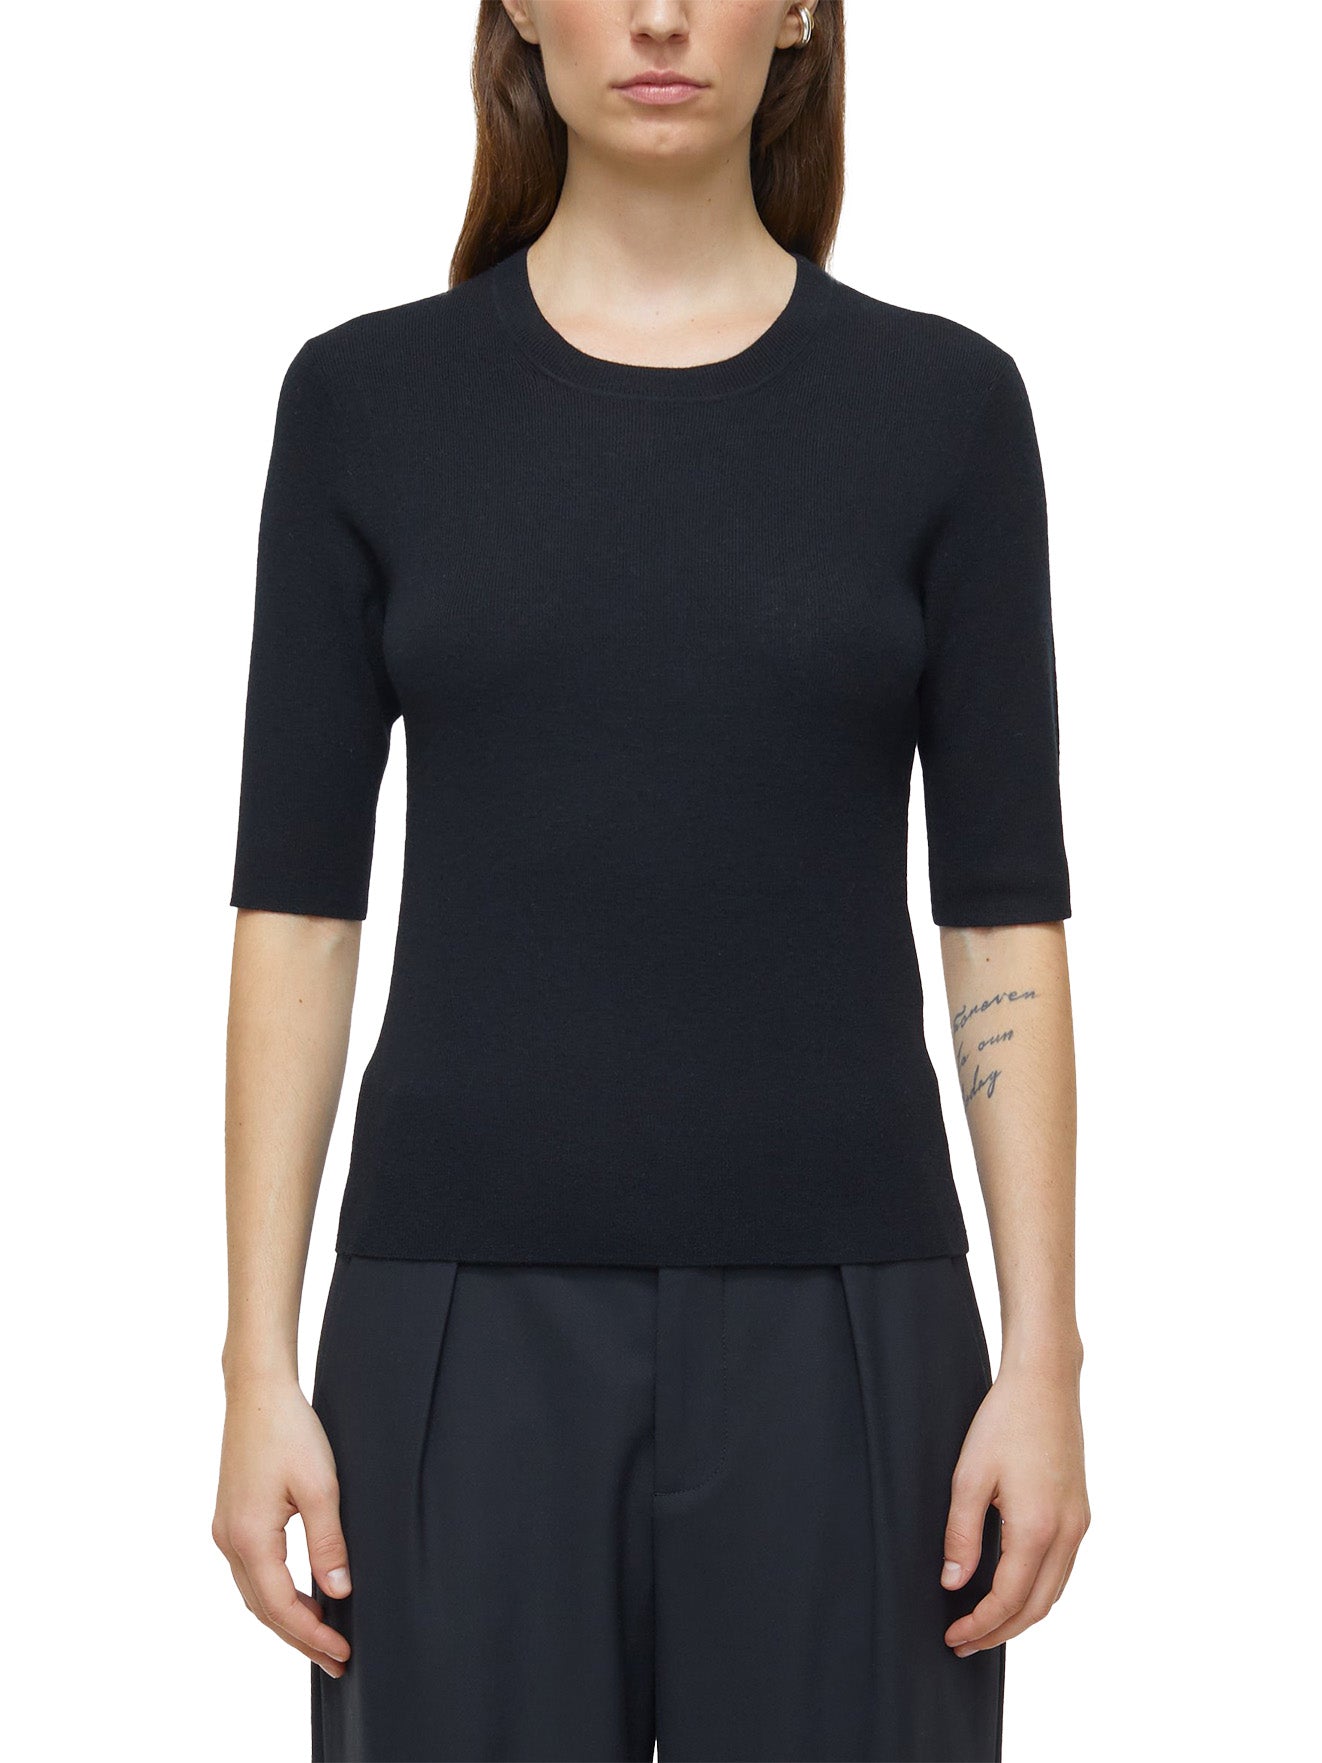 Cashmere Mix Top in Black